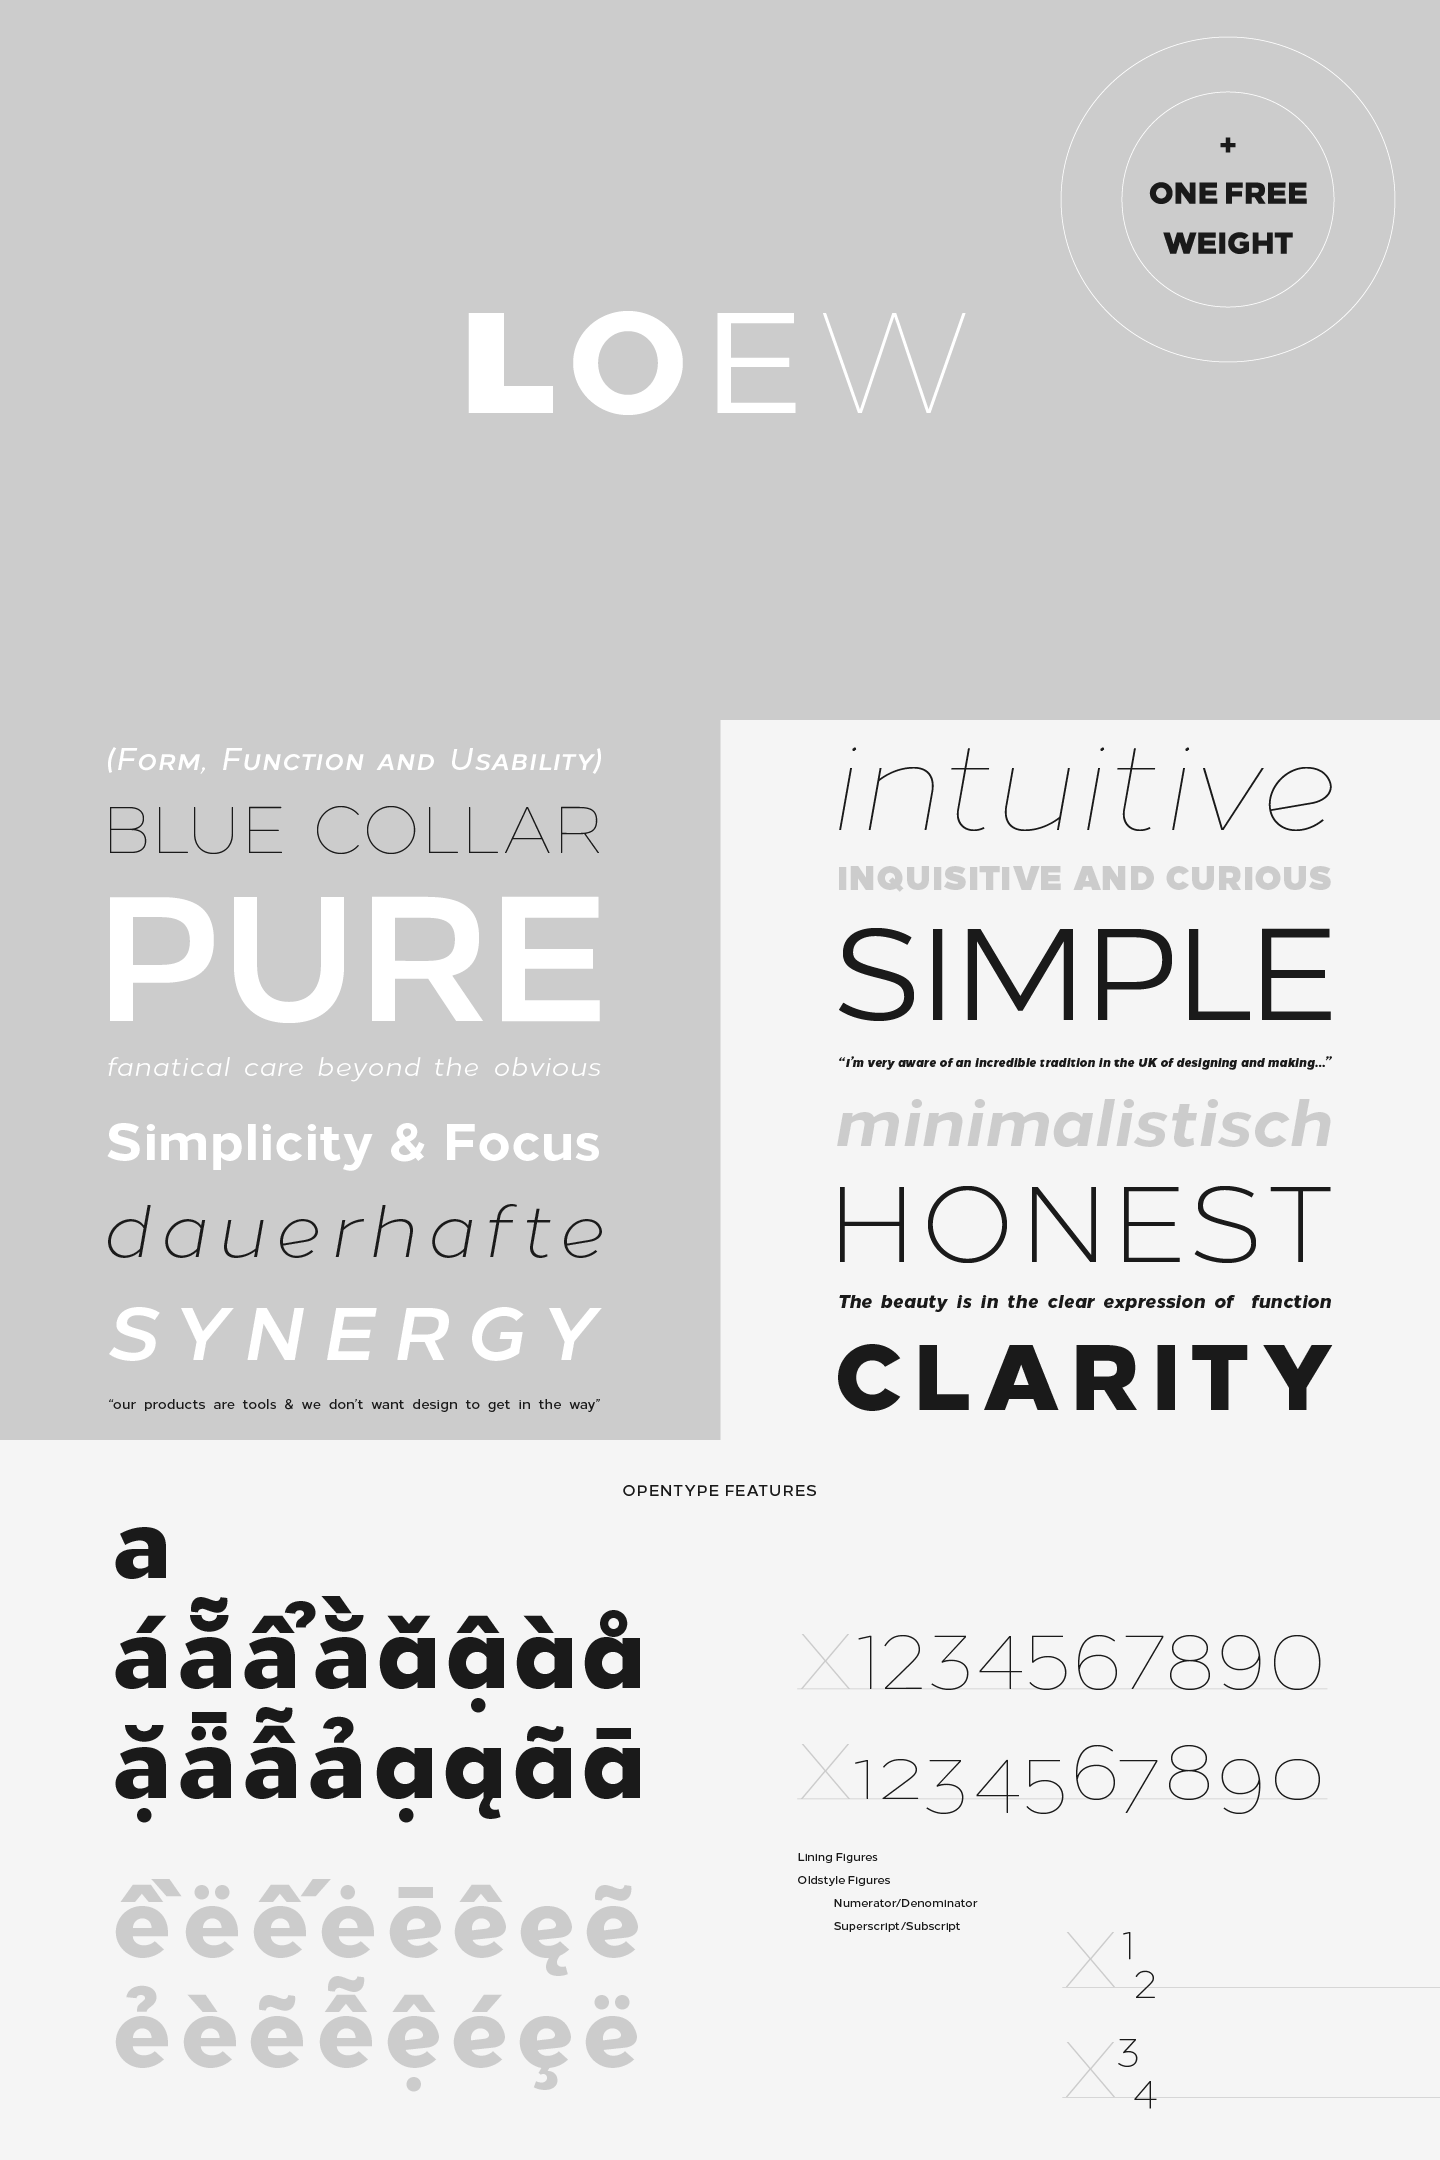 The Loew typeface, a geometric sans serif font family designed by Jonathan Hill of The Northern Block Ltd.